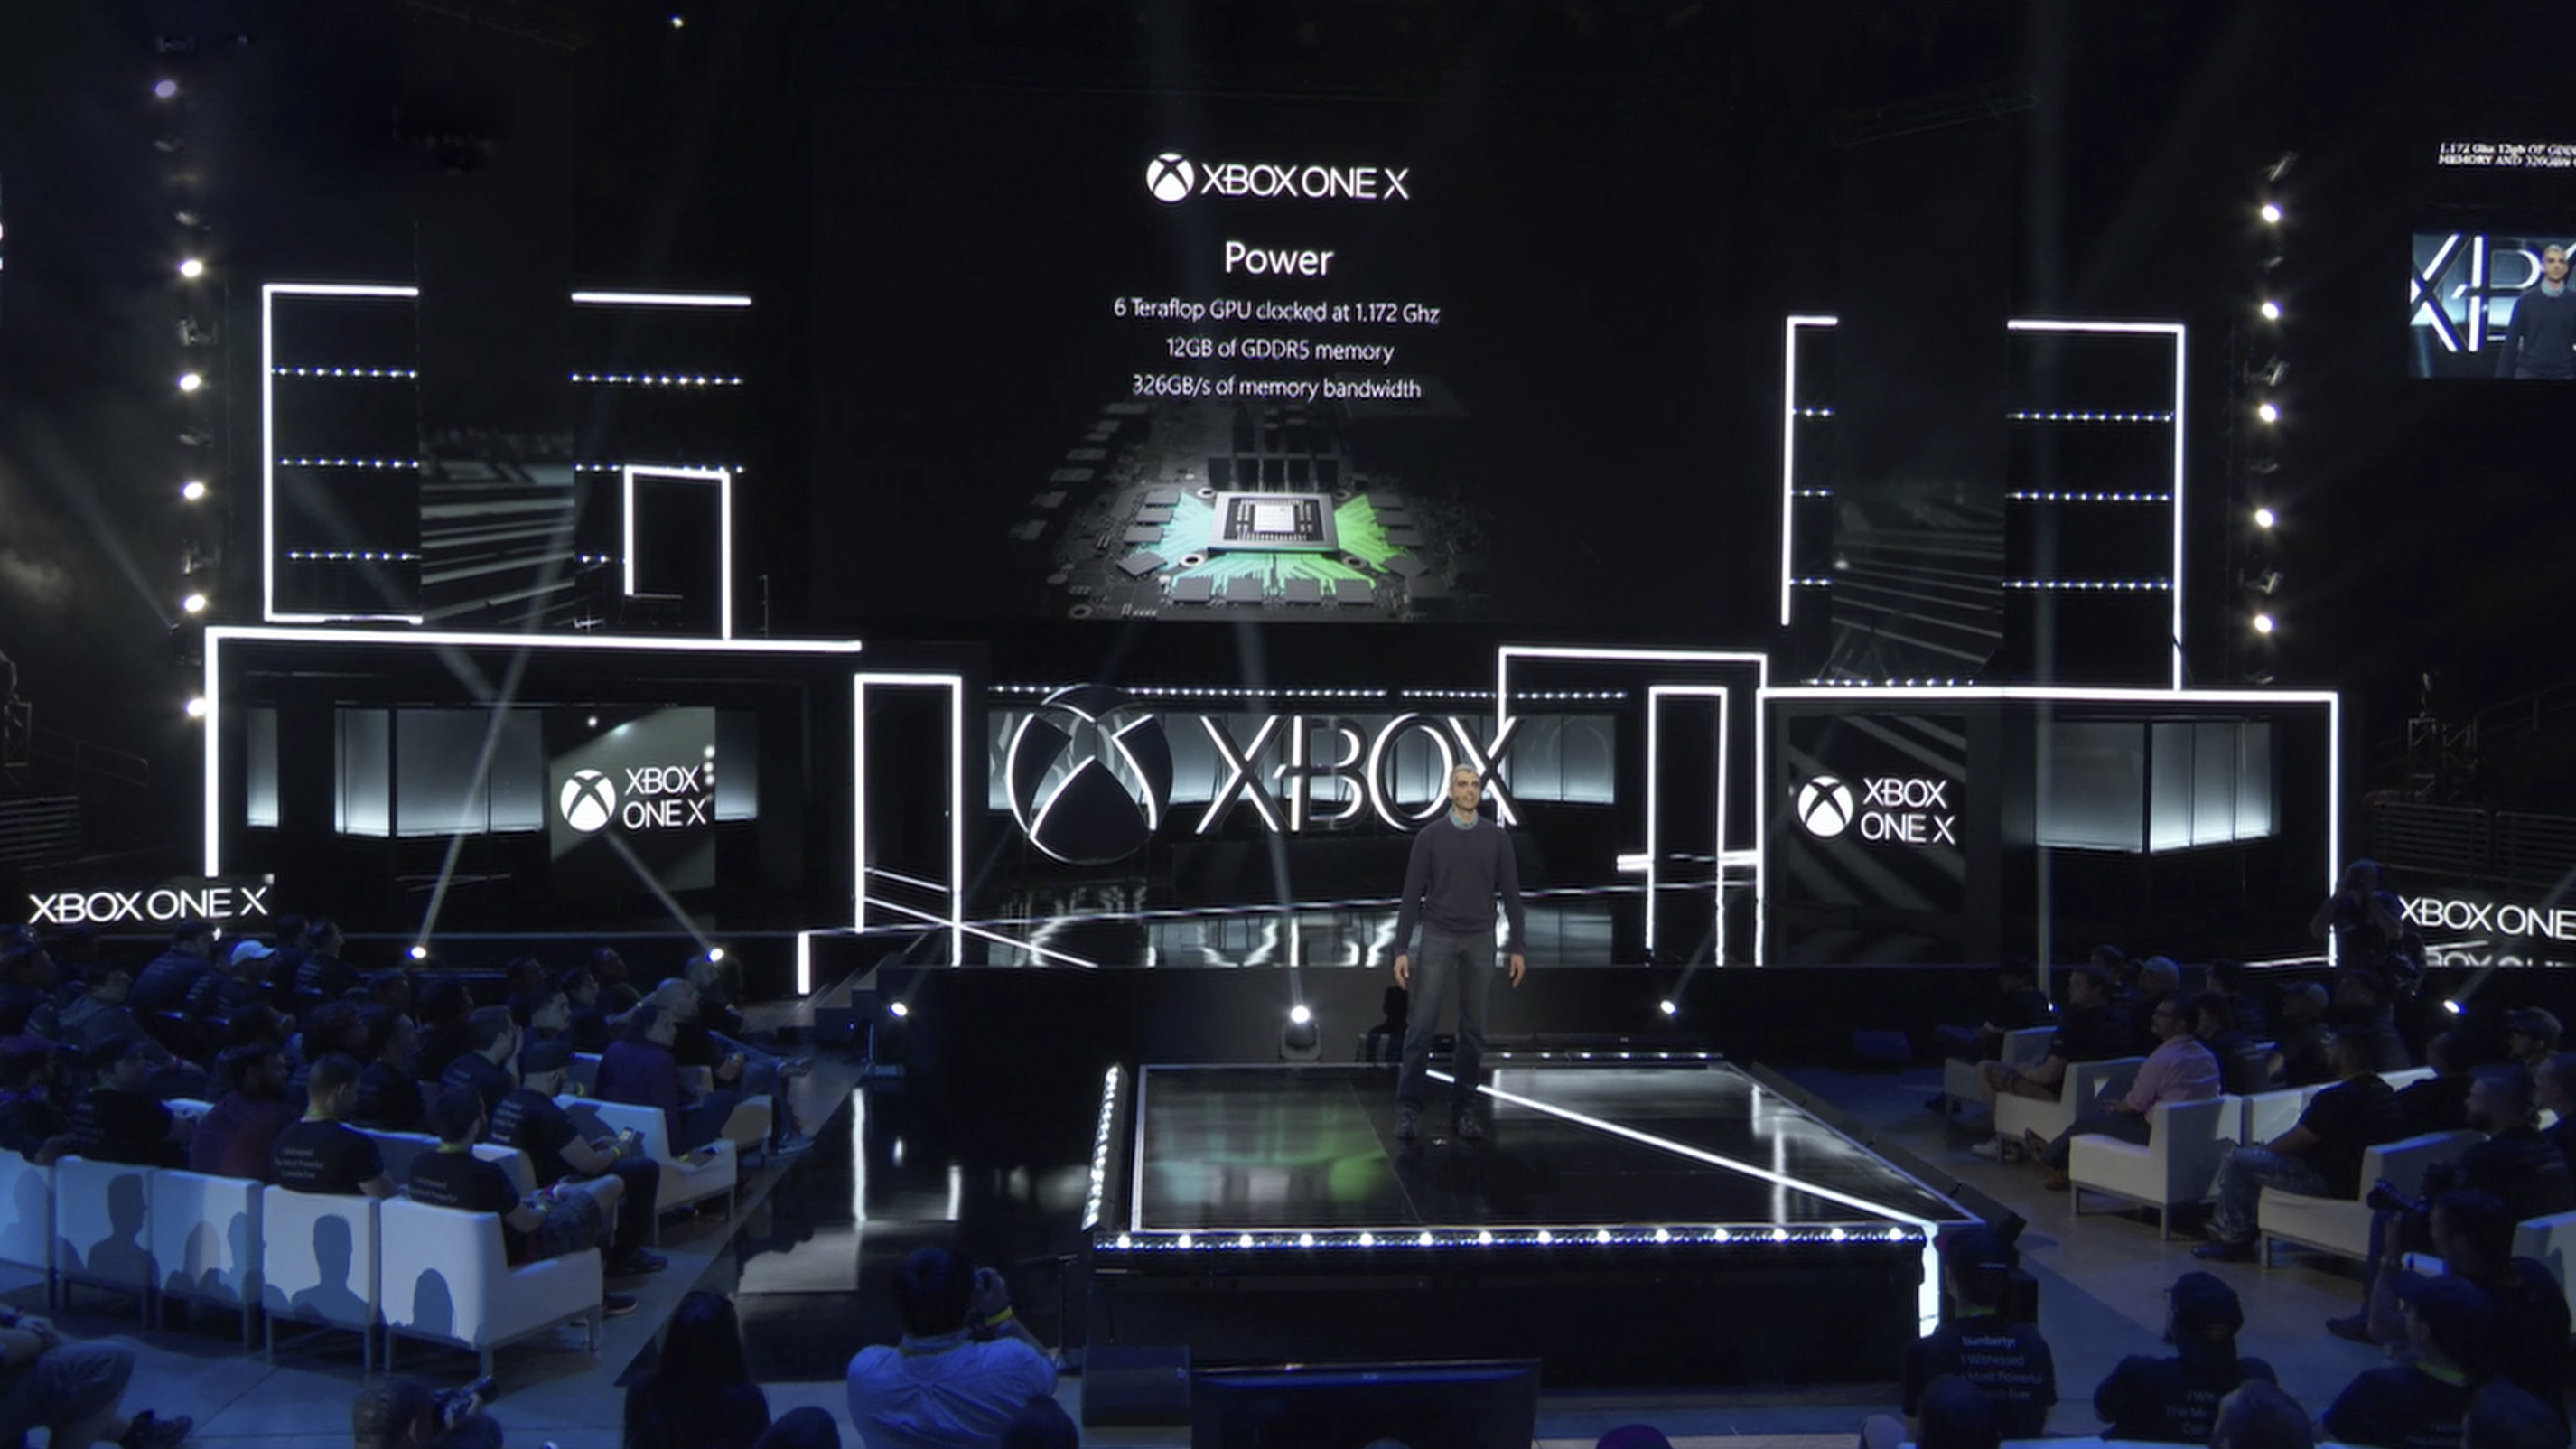 xbox one x announced screen shot 2017 06 11 at 2 20 pm